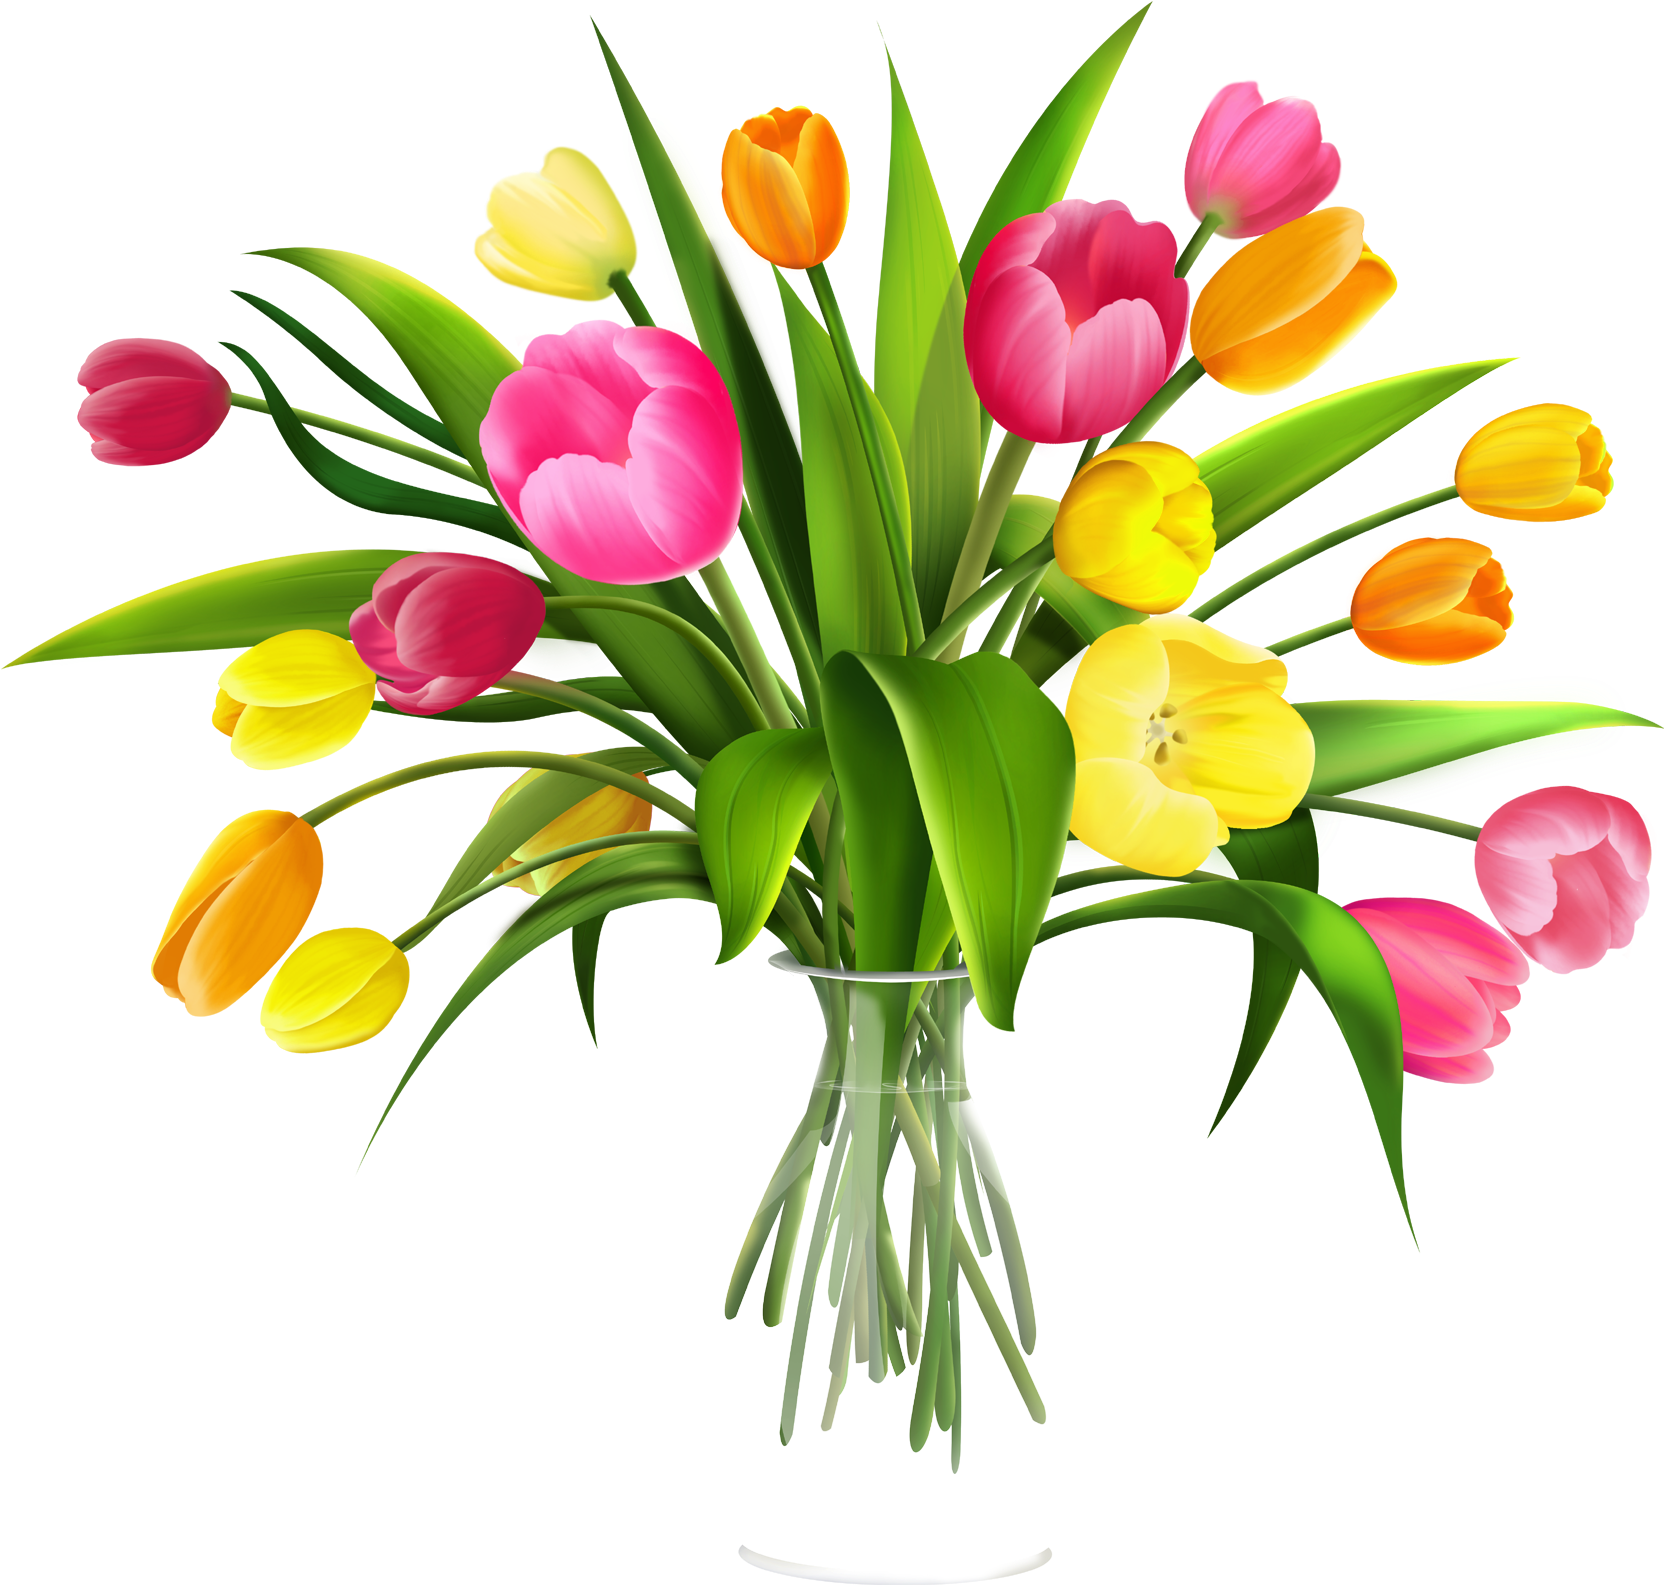 Easter Flower Bouquet PNG HD Quality